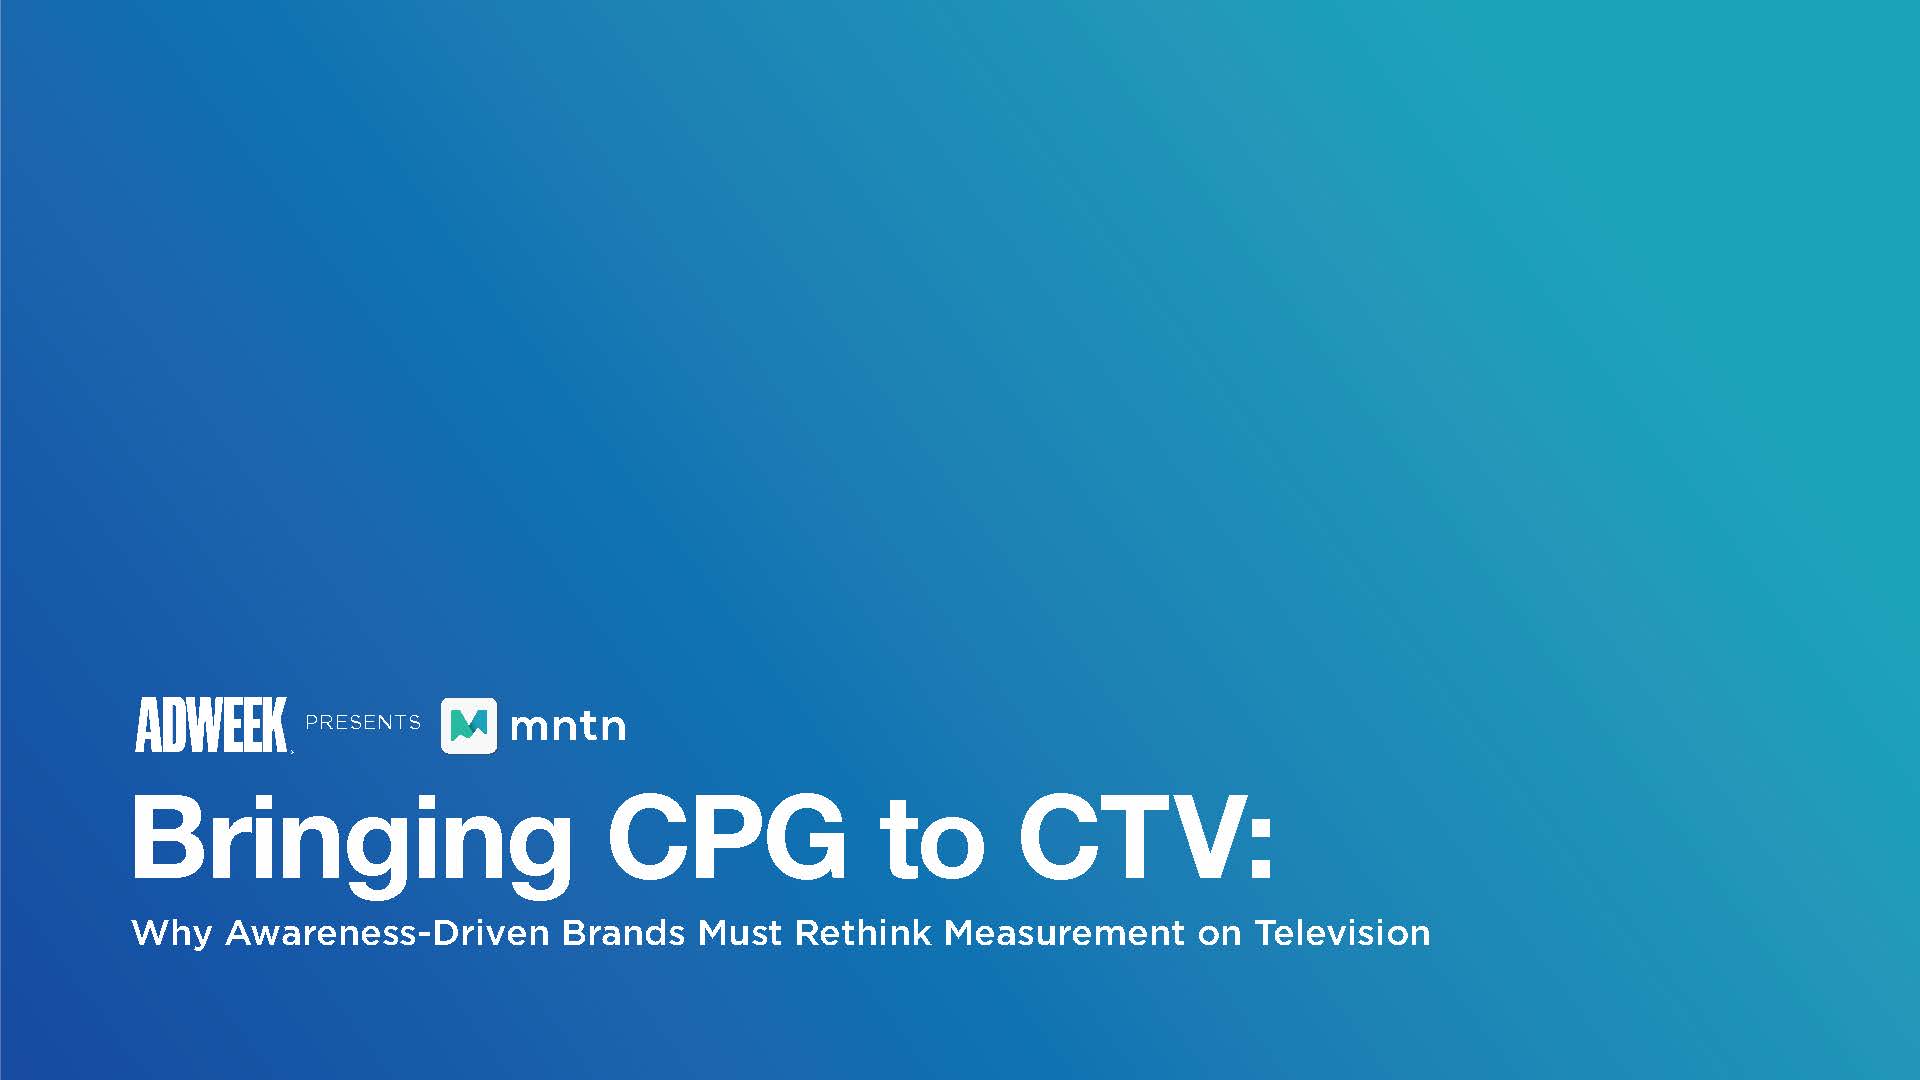 Bringing CPG to CTV: Why Awareness-Driven Brands Must Rethink Measurement on Television